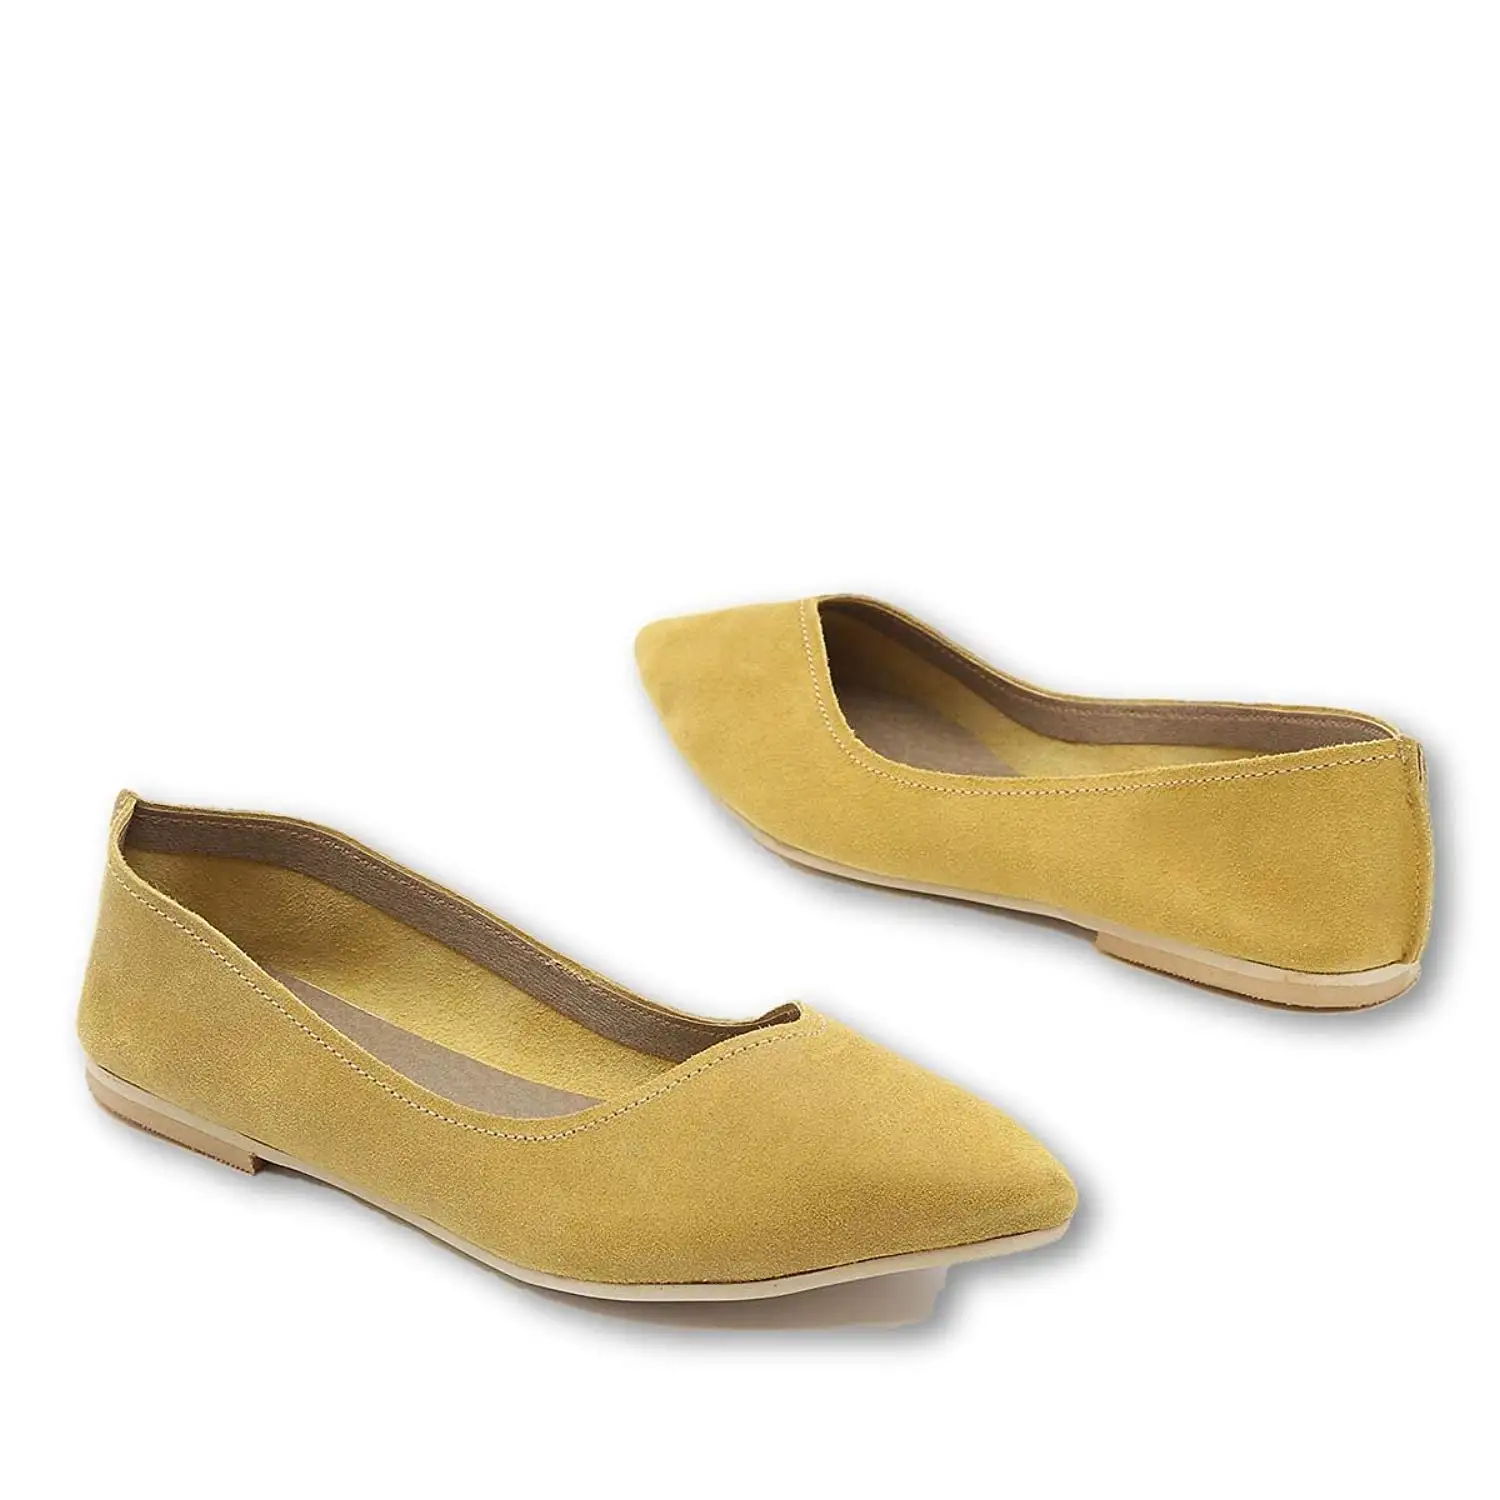 Shoes Slip On Loafer Comfort Pointy Toe 